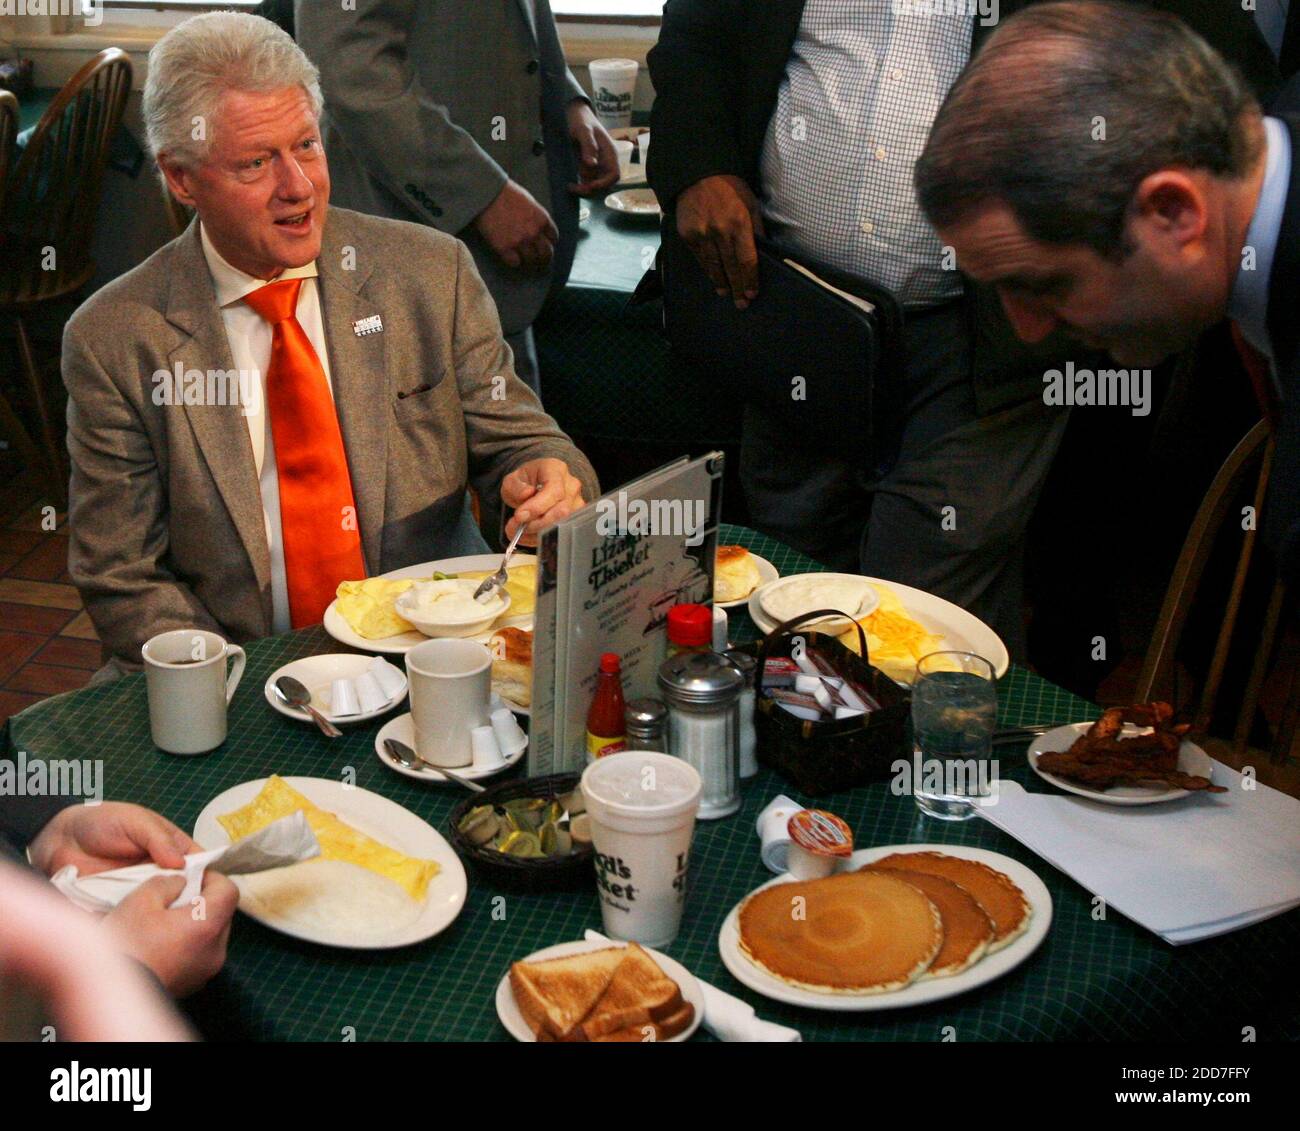 Former President Bill Clinton enjoys breakfast at the Lizard's Thicket, where Clinton was campaigning for his wife Hillary, in Columbia, SC, USA on January 22, 2008. Photo by Jeff Blake/The State/MCT/ABACAPRESS.COM Stock Photo